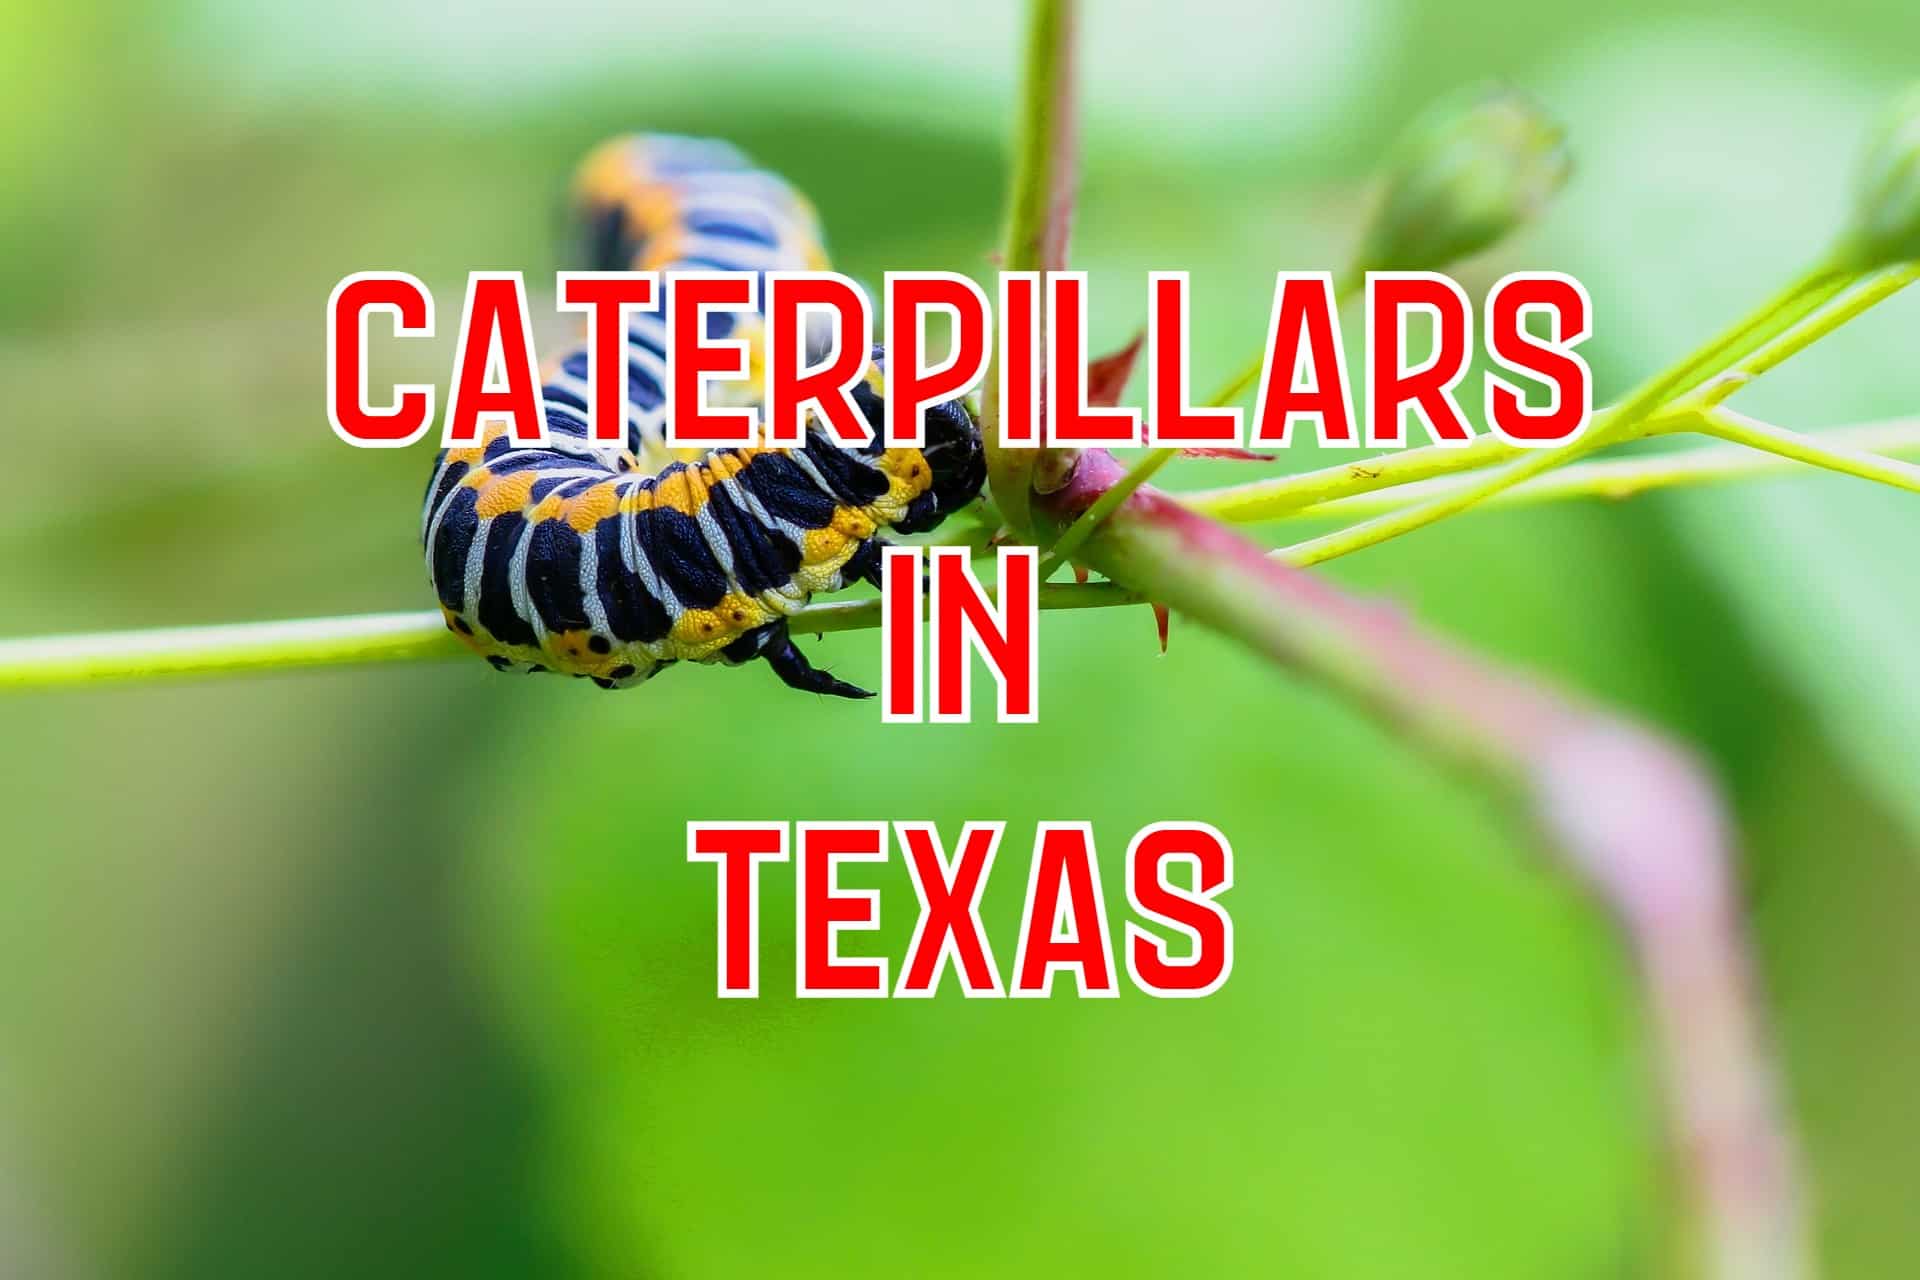 42 Caterpillars in Texas (Pictures and Identification Guide)